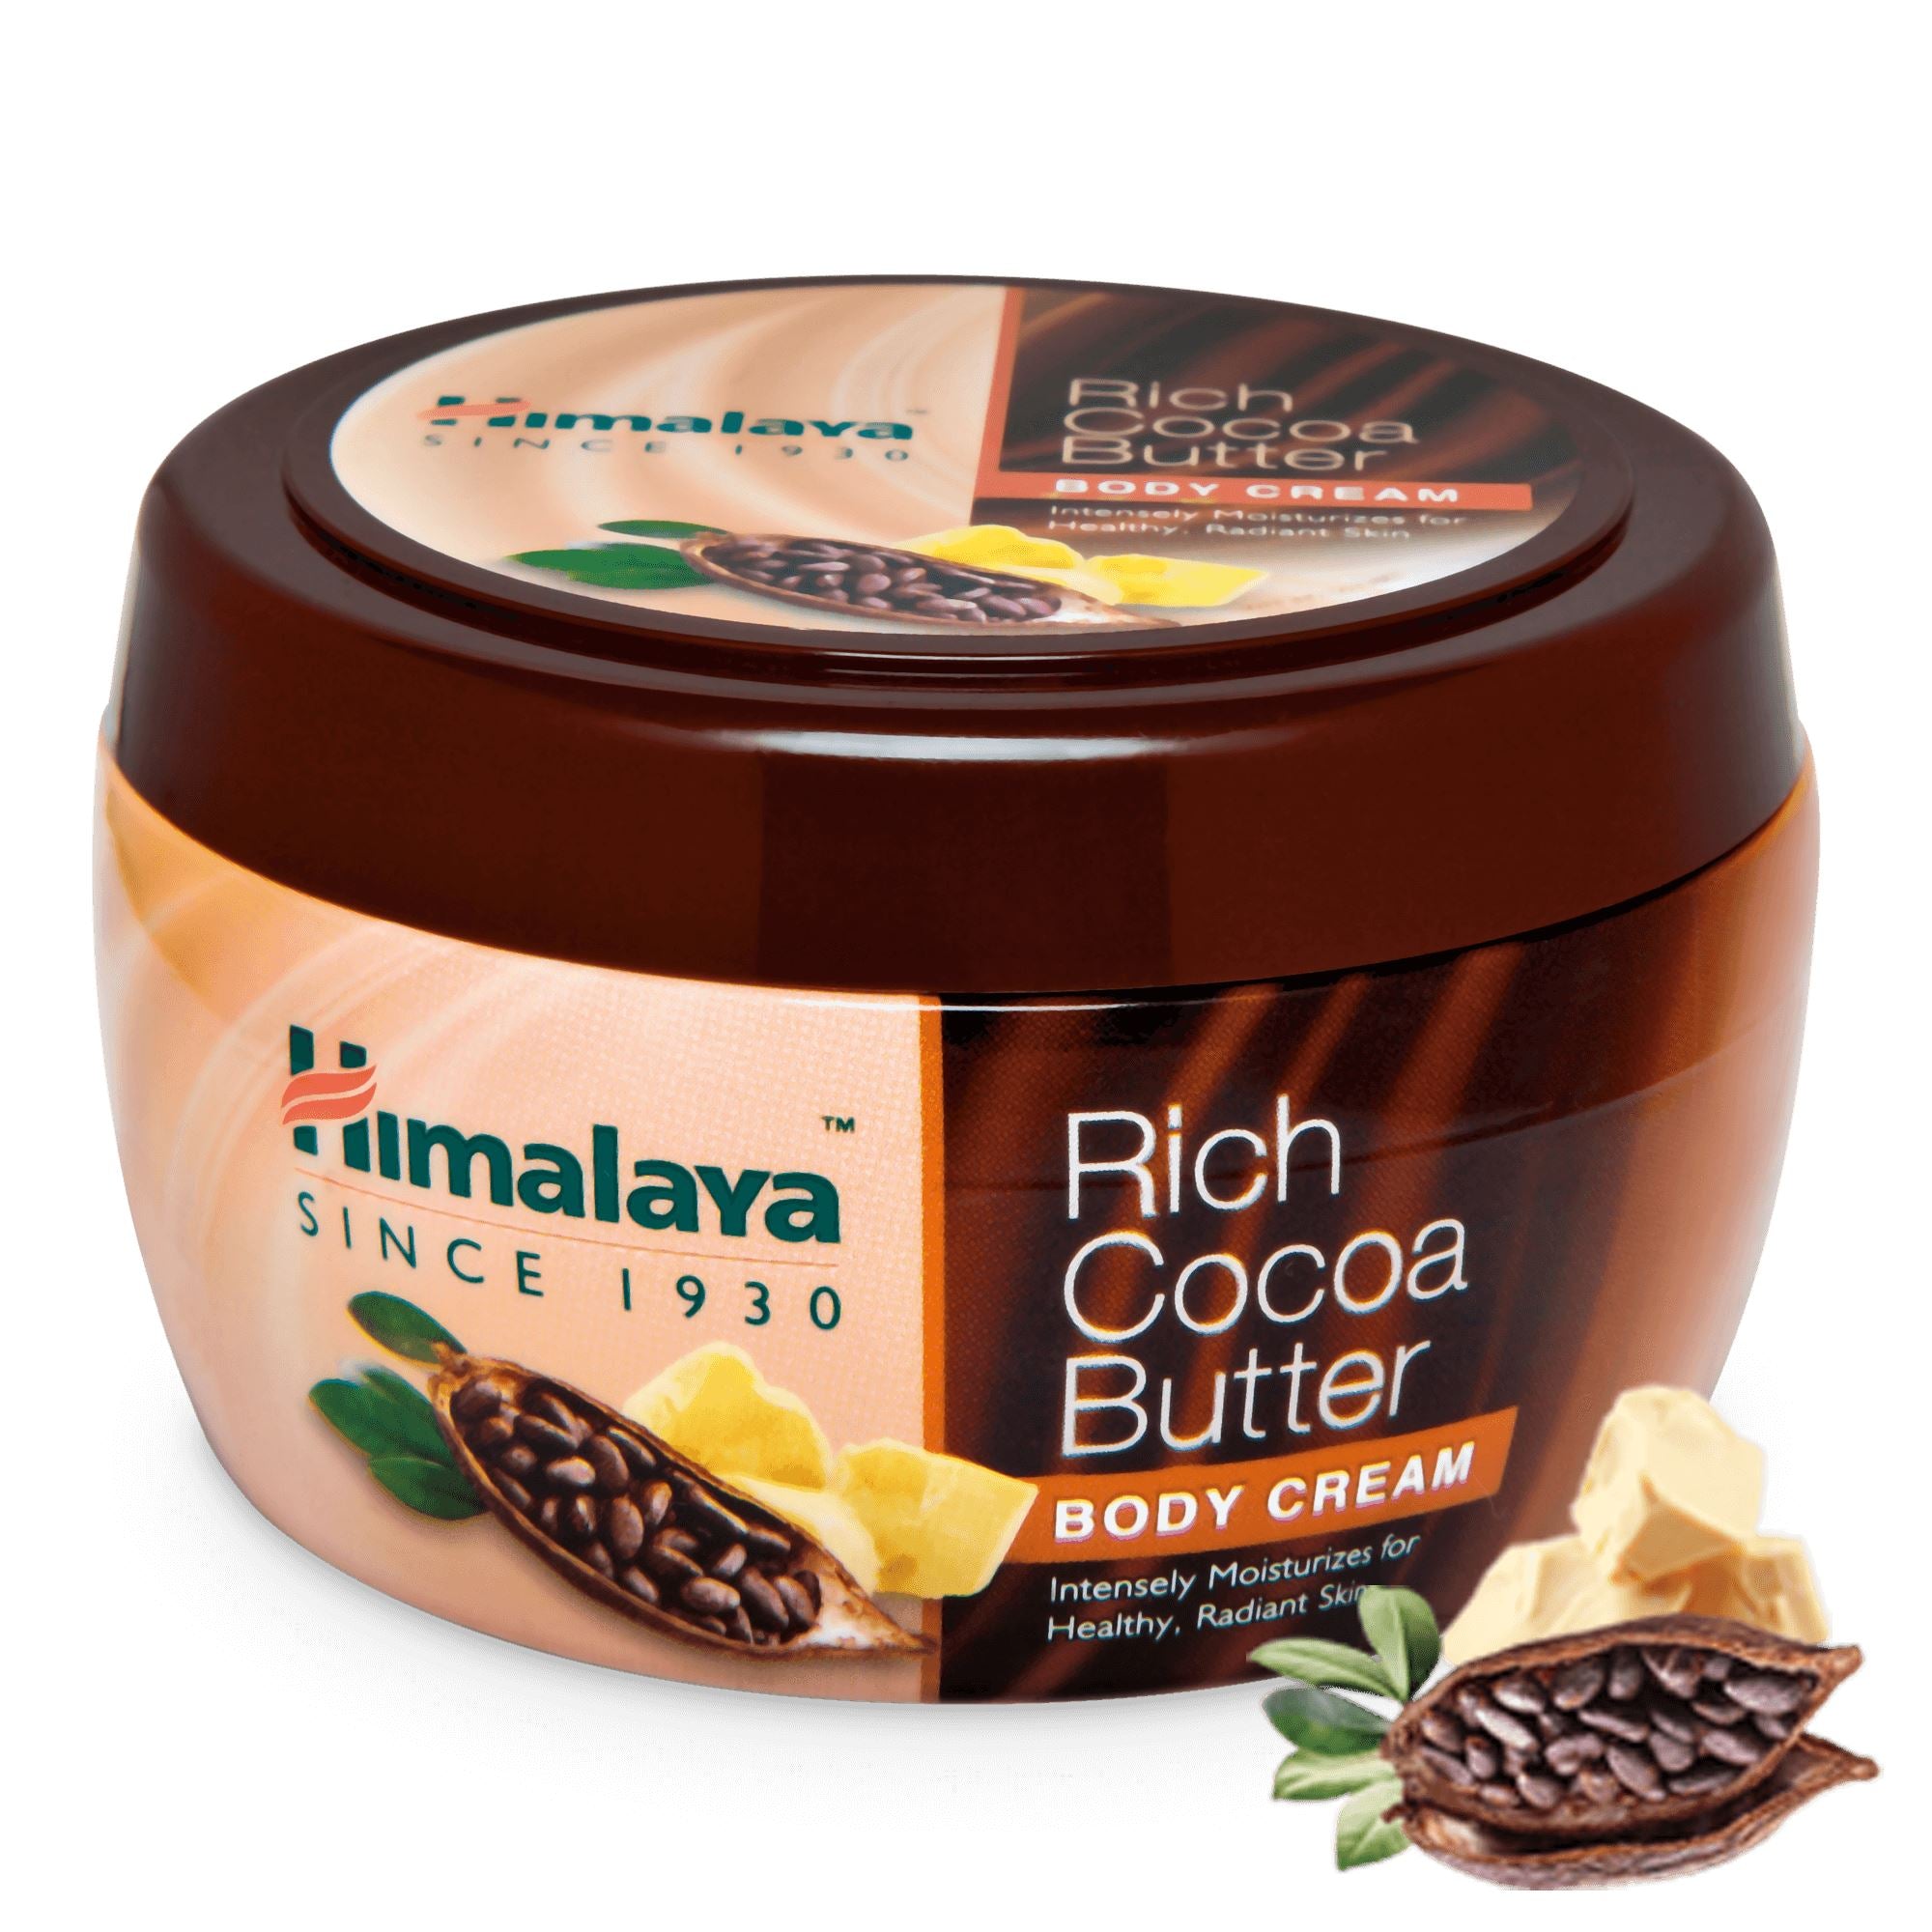 Himalaya Rich Cocoa Butter Body Cream - Intensely moisturizes for healthy, radiant skin